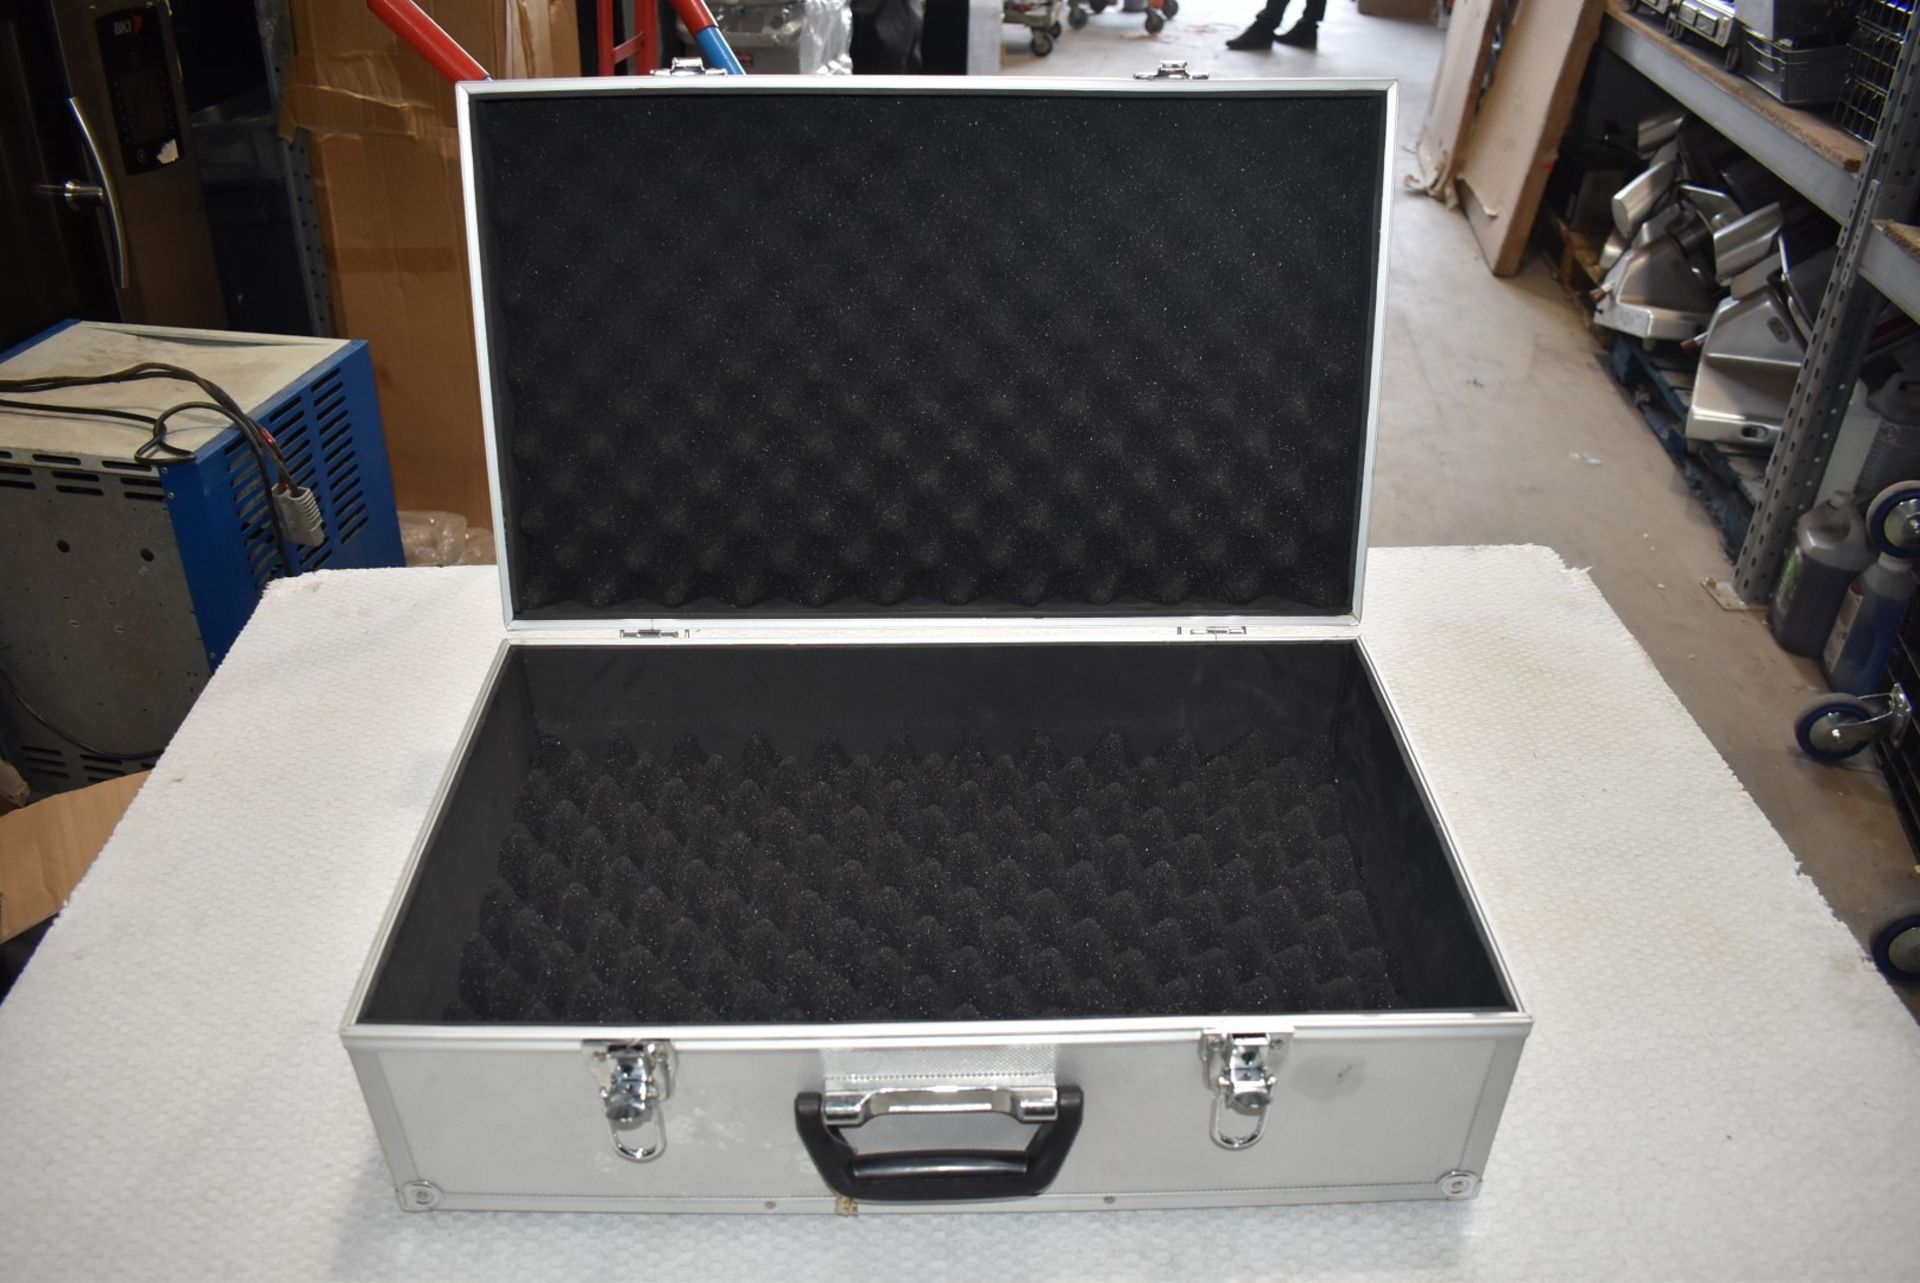 1 x Foam Padded Heavy Duty Transit Case - With Lock and Key - Size: 58 x 35 x 20 cms - Image 3 of 5